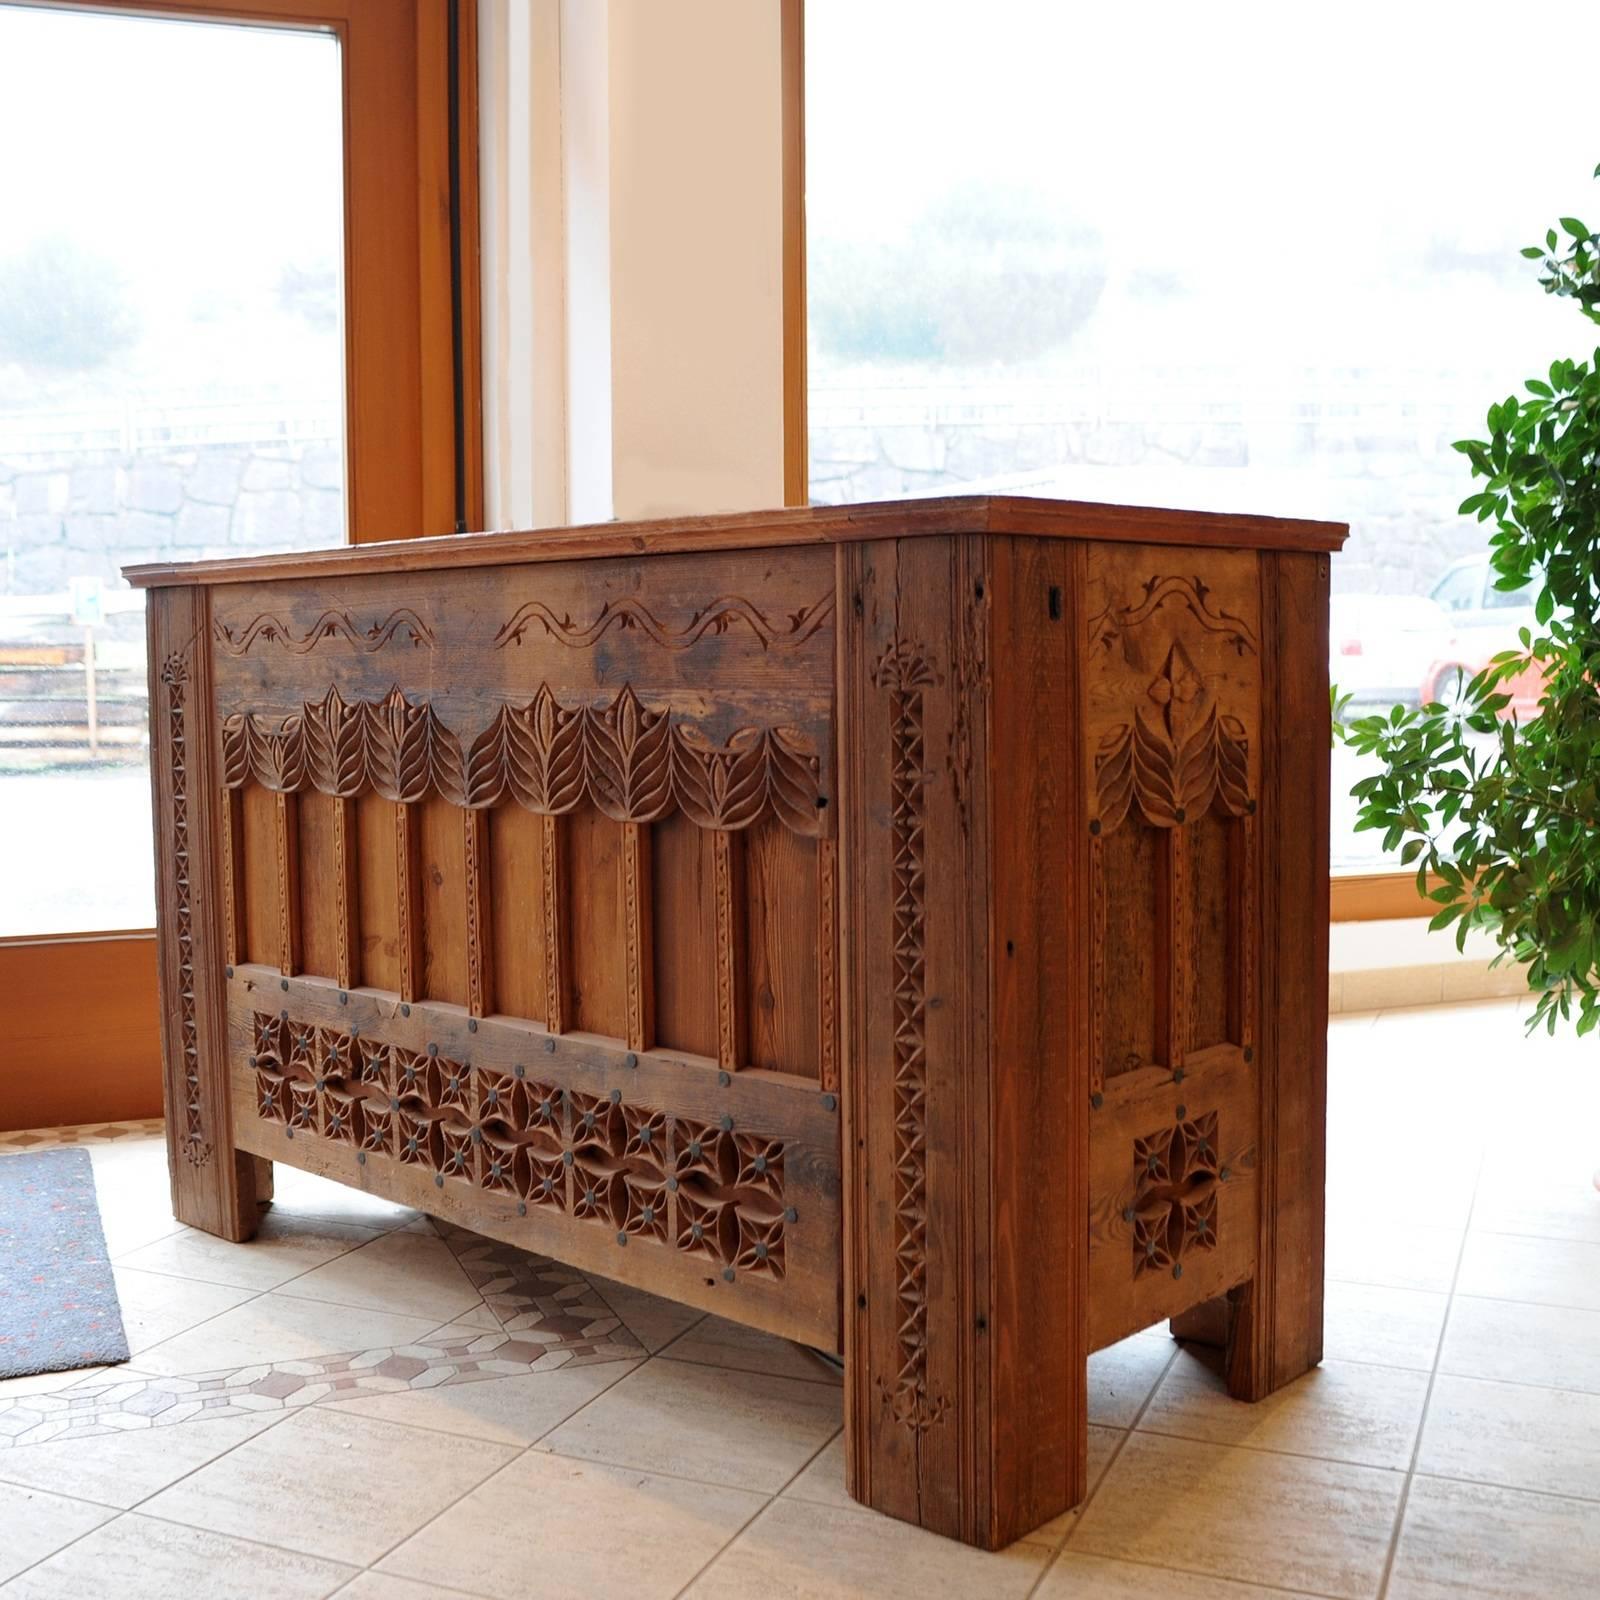 A stunning piece of functional decor, this chest is inspired by the gothic style of the Elsass region in France, bordering with Germany. Its one-of-a-kind allure comes from the larch used to craft it, which is 400 to 600 years old. The hand-carved